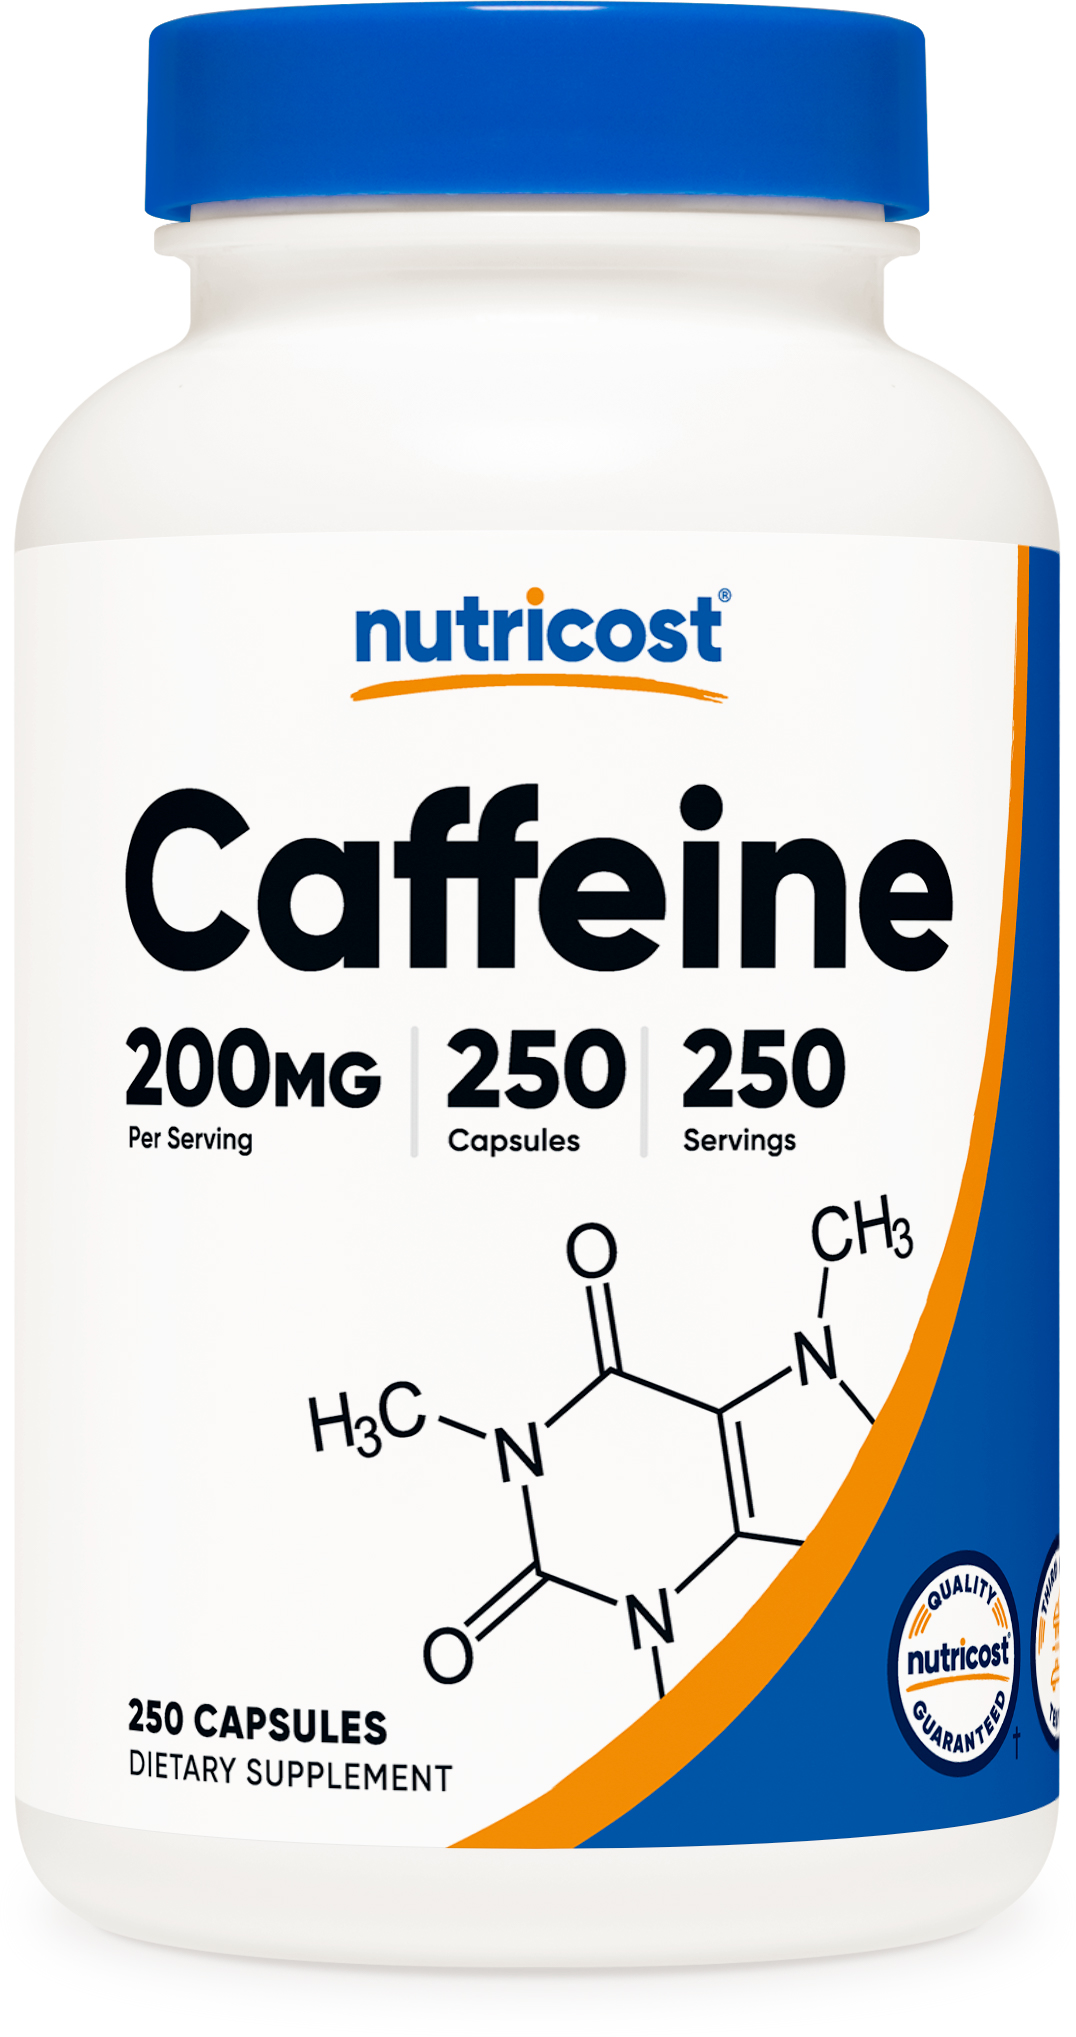 nutricost caffeine 200mg 250 capsules bottle